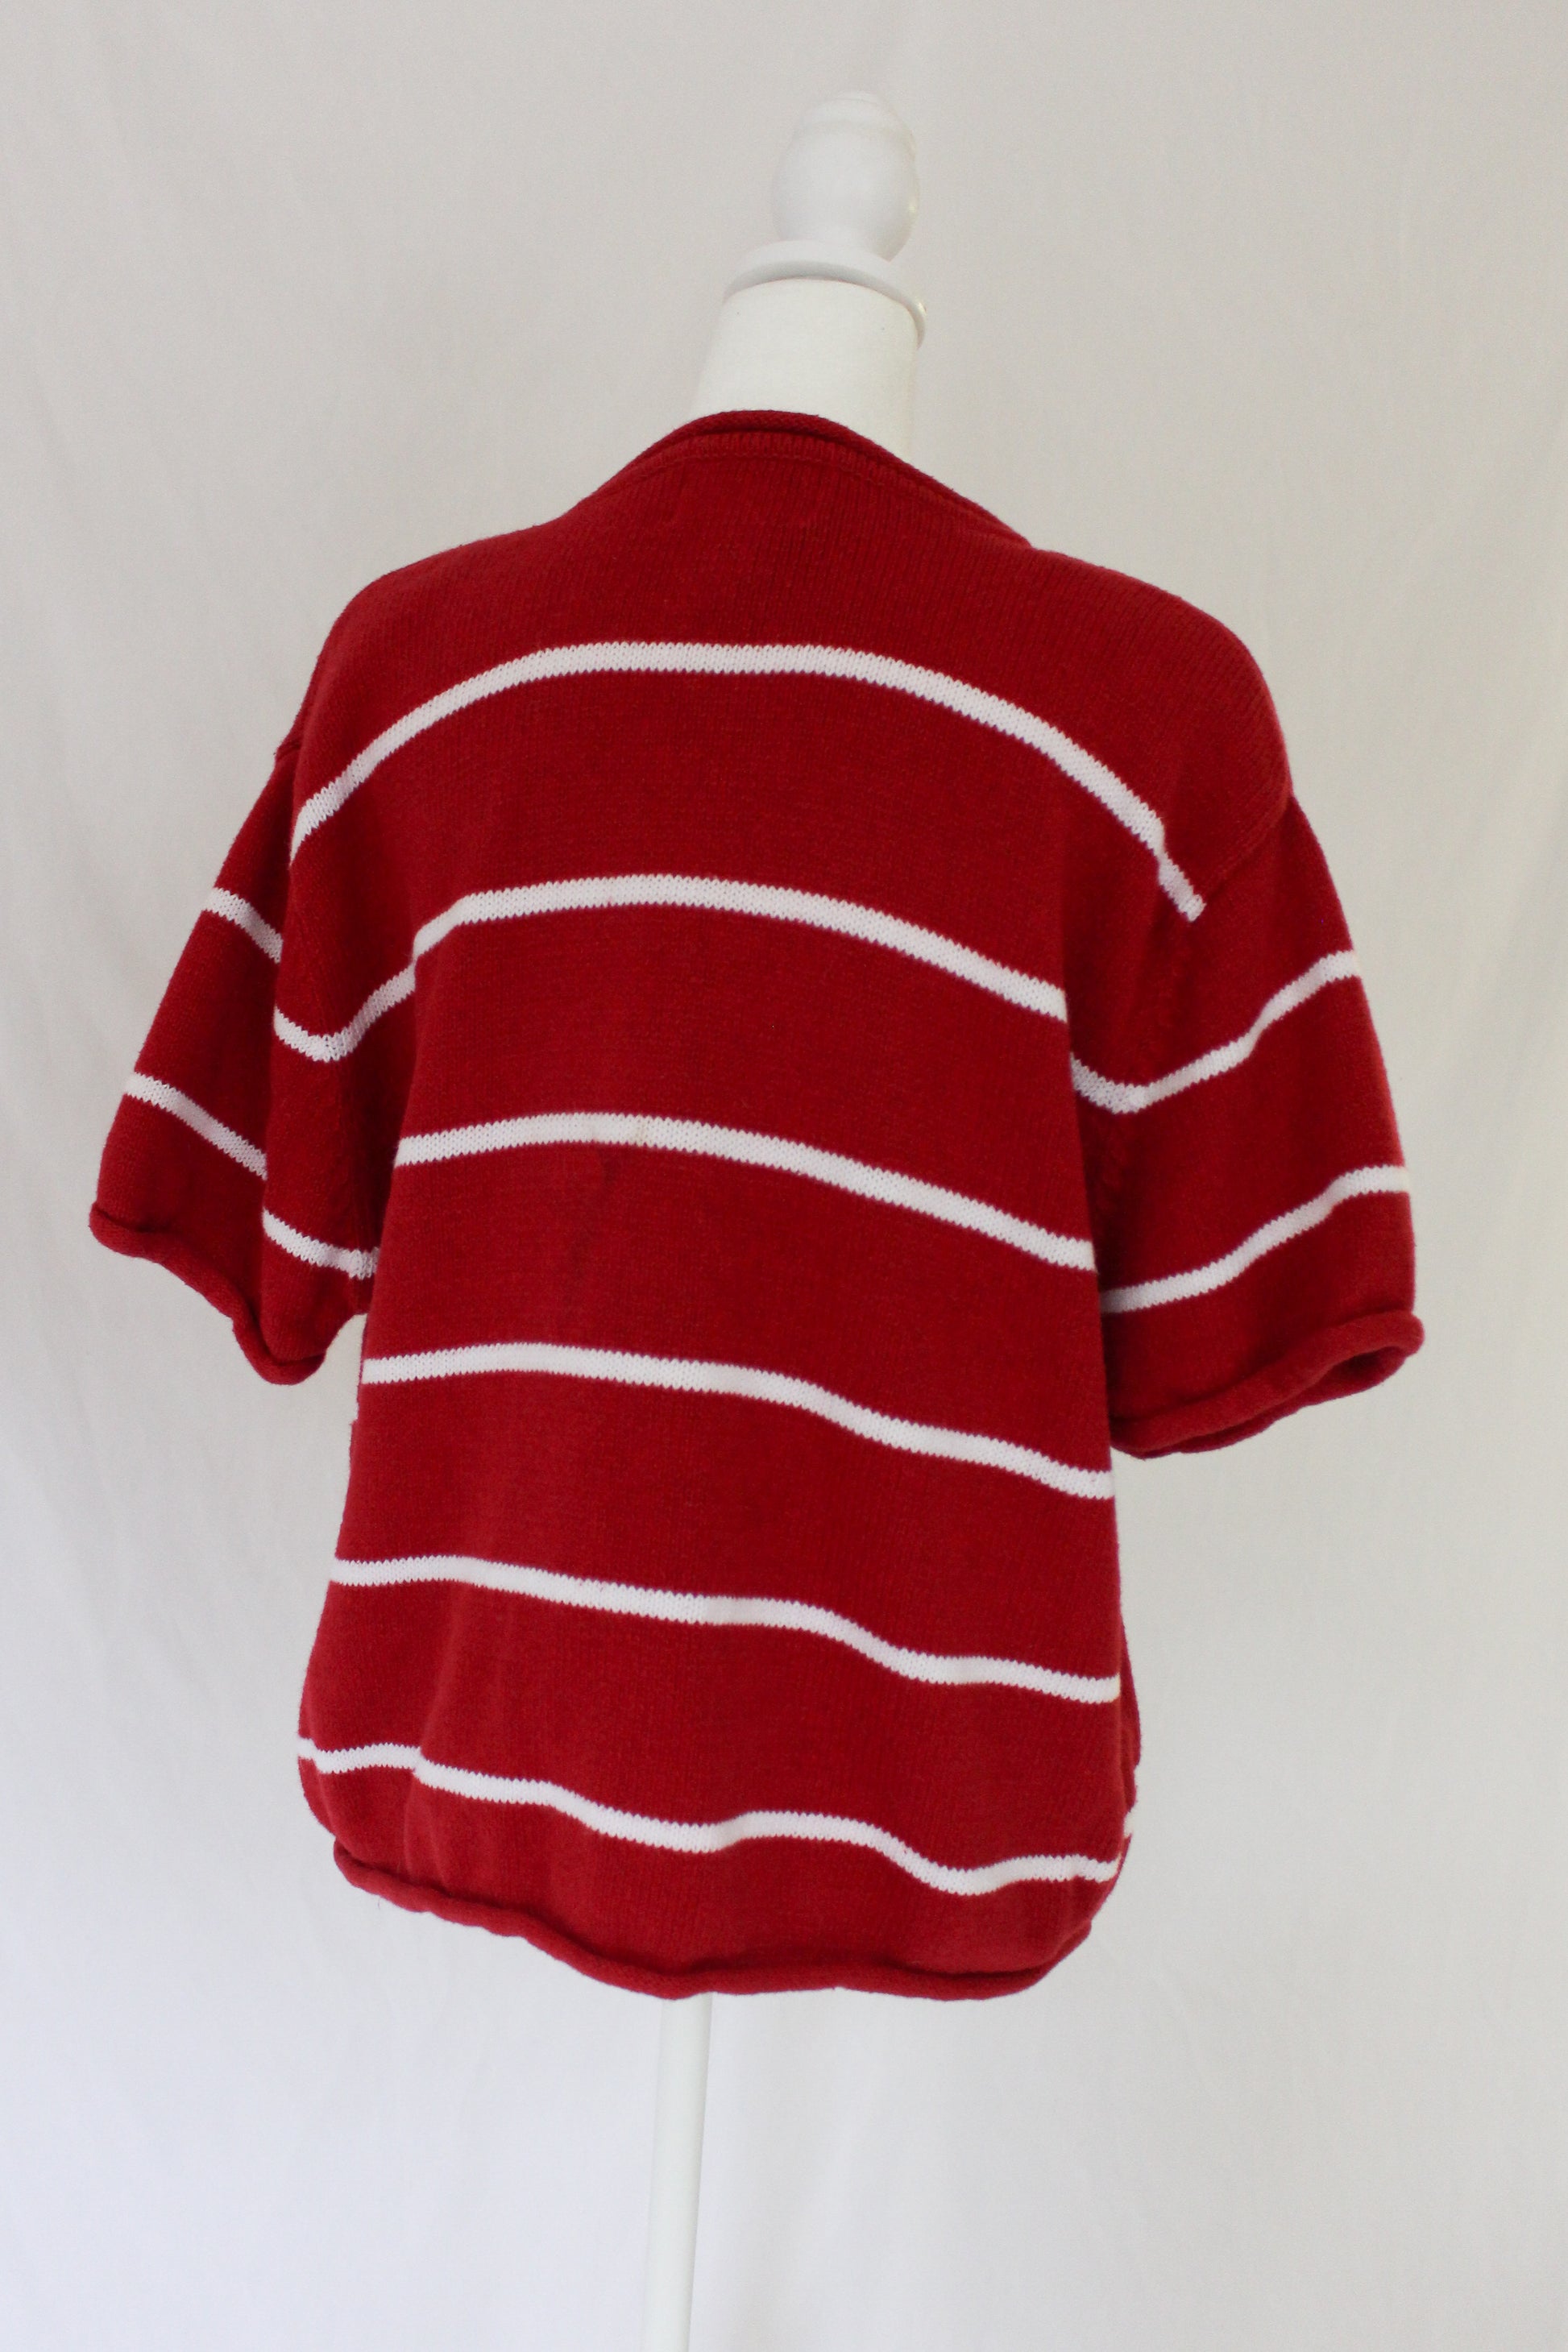 red and white striped sweater t-shirt, memorial day sweater, labor day sweater